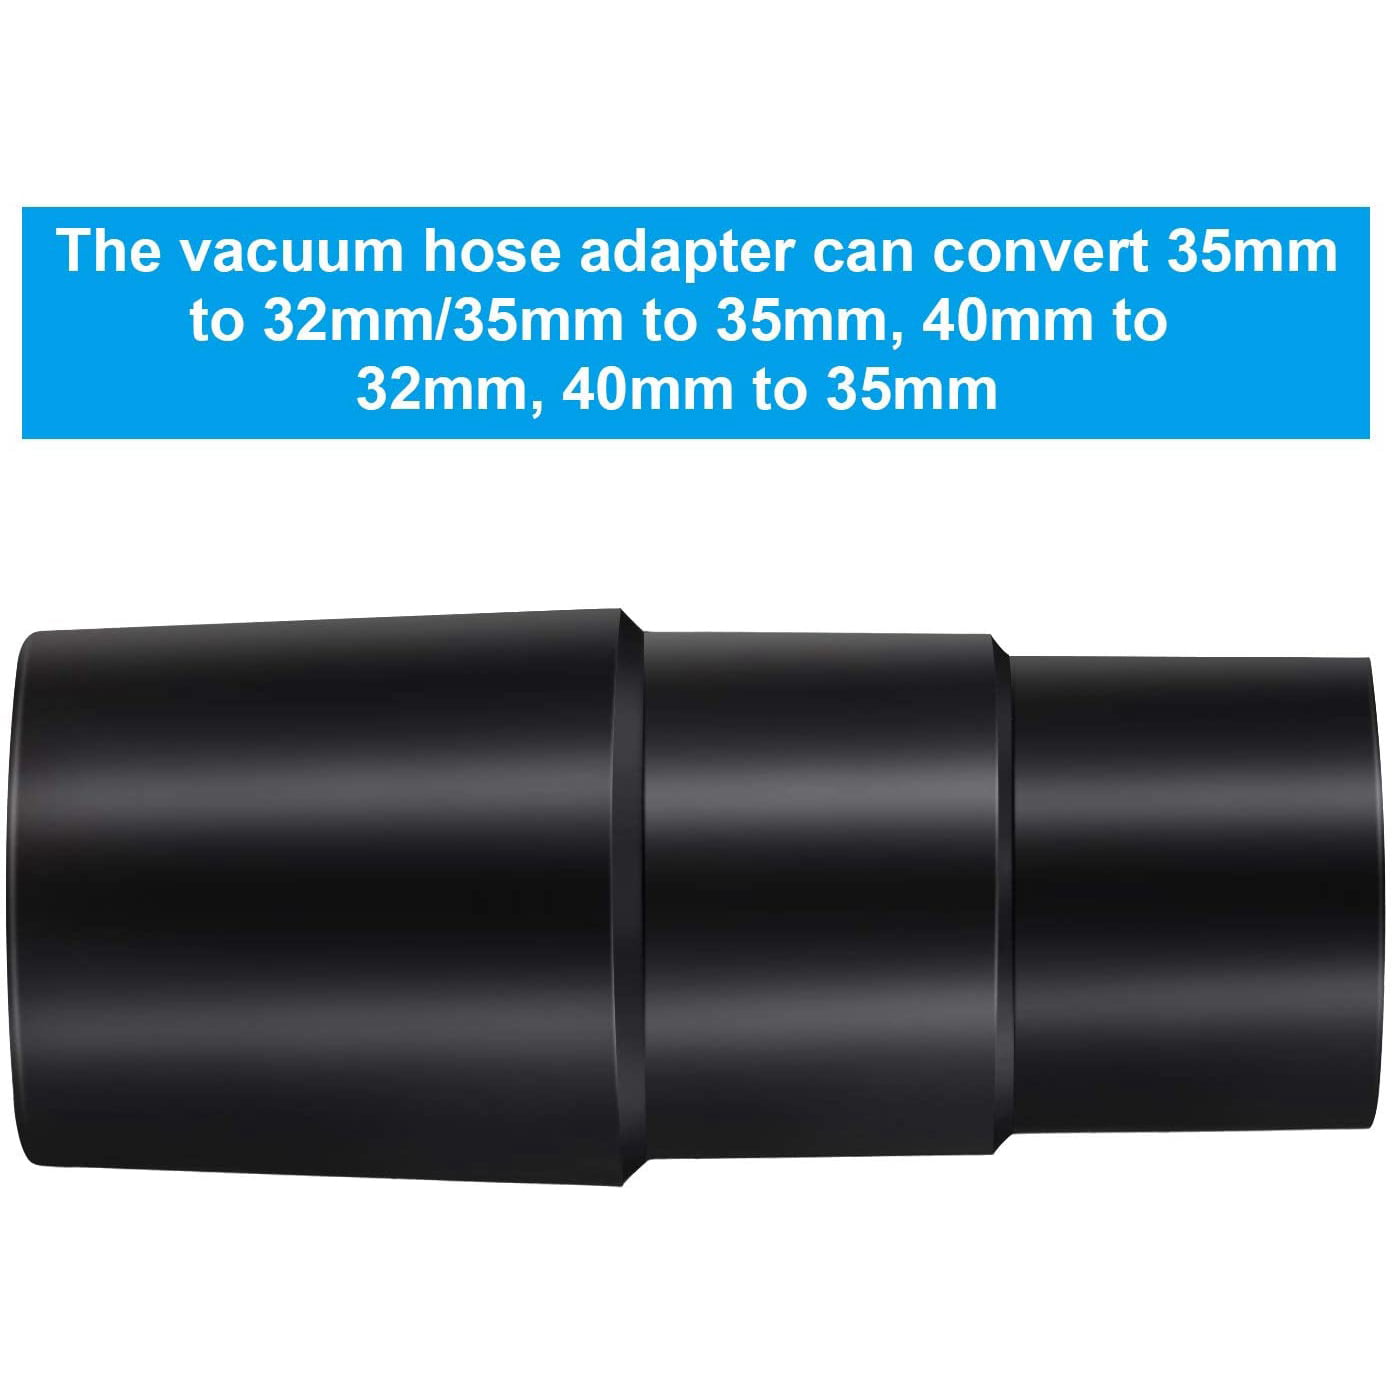 Set of 2 32mm to 35mm Vacuum Cleaner Hose Adapter Converter Tool Attachment 